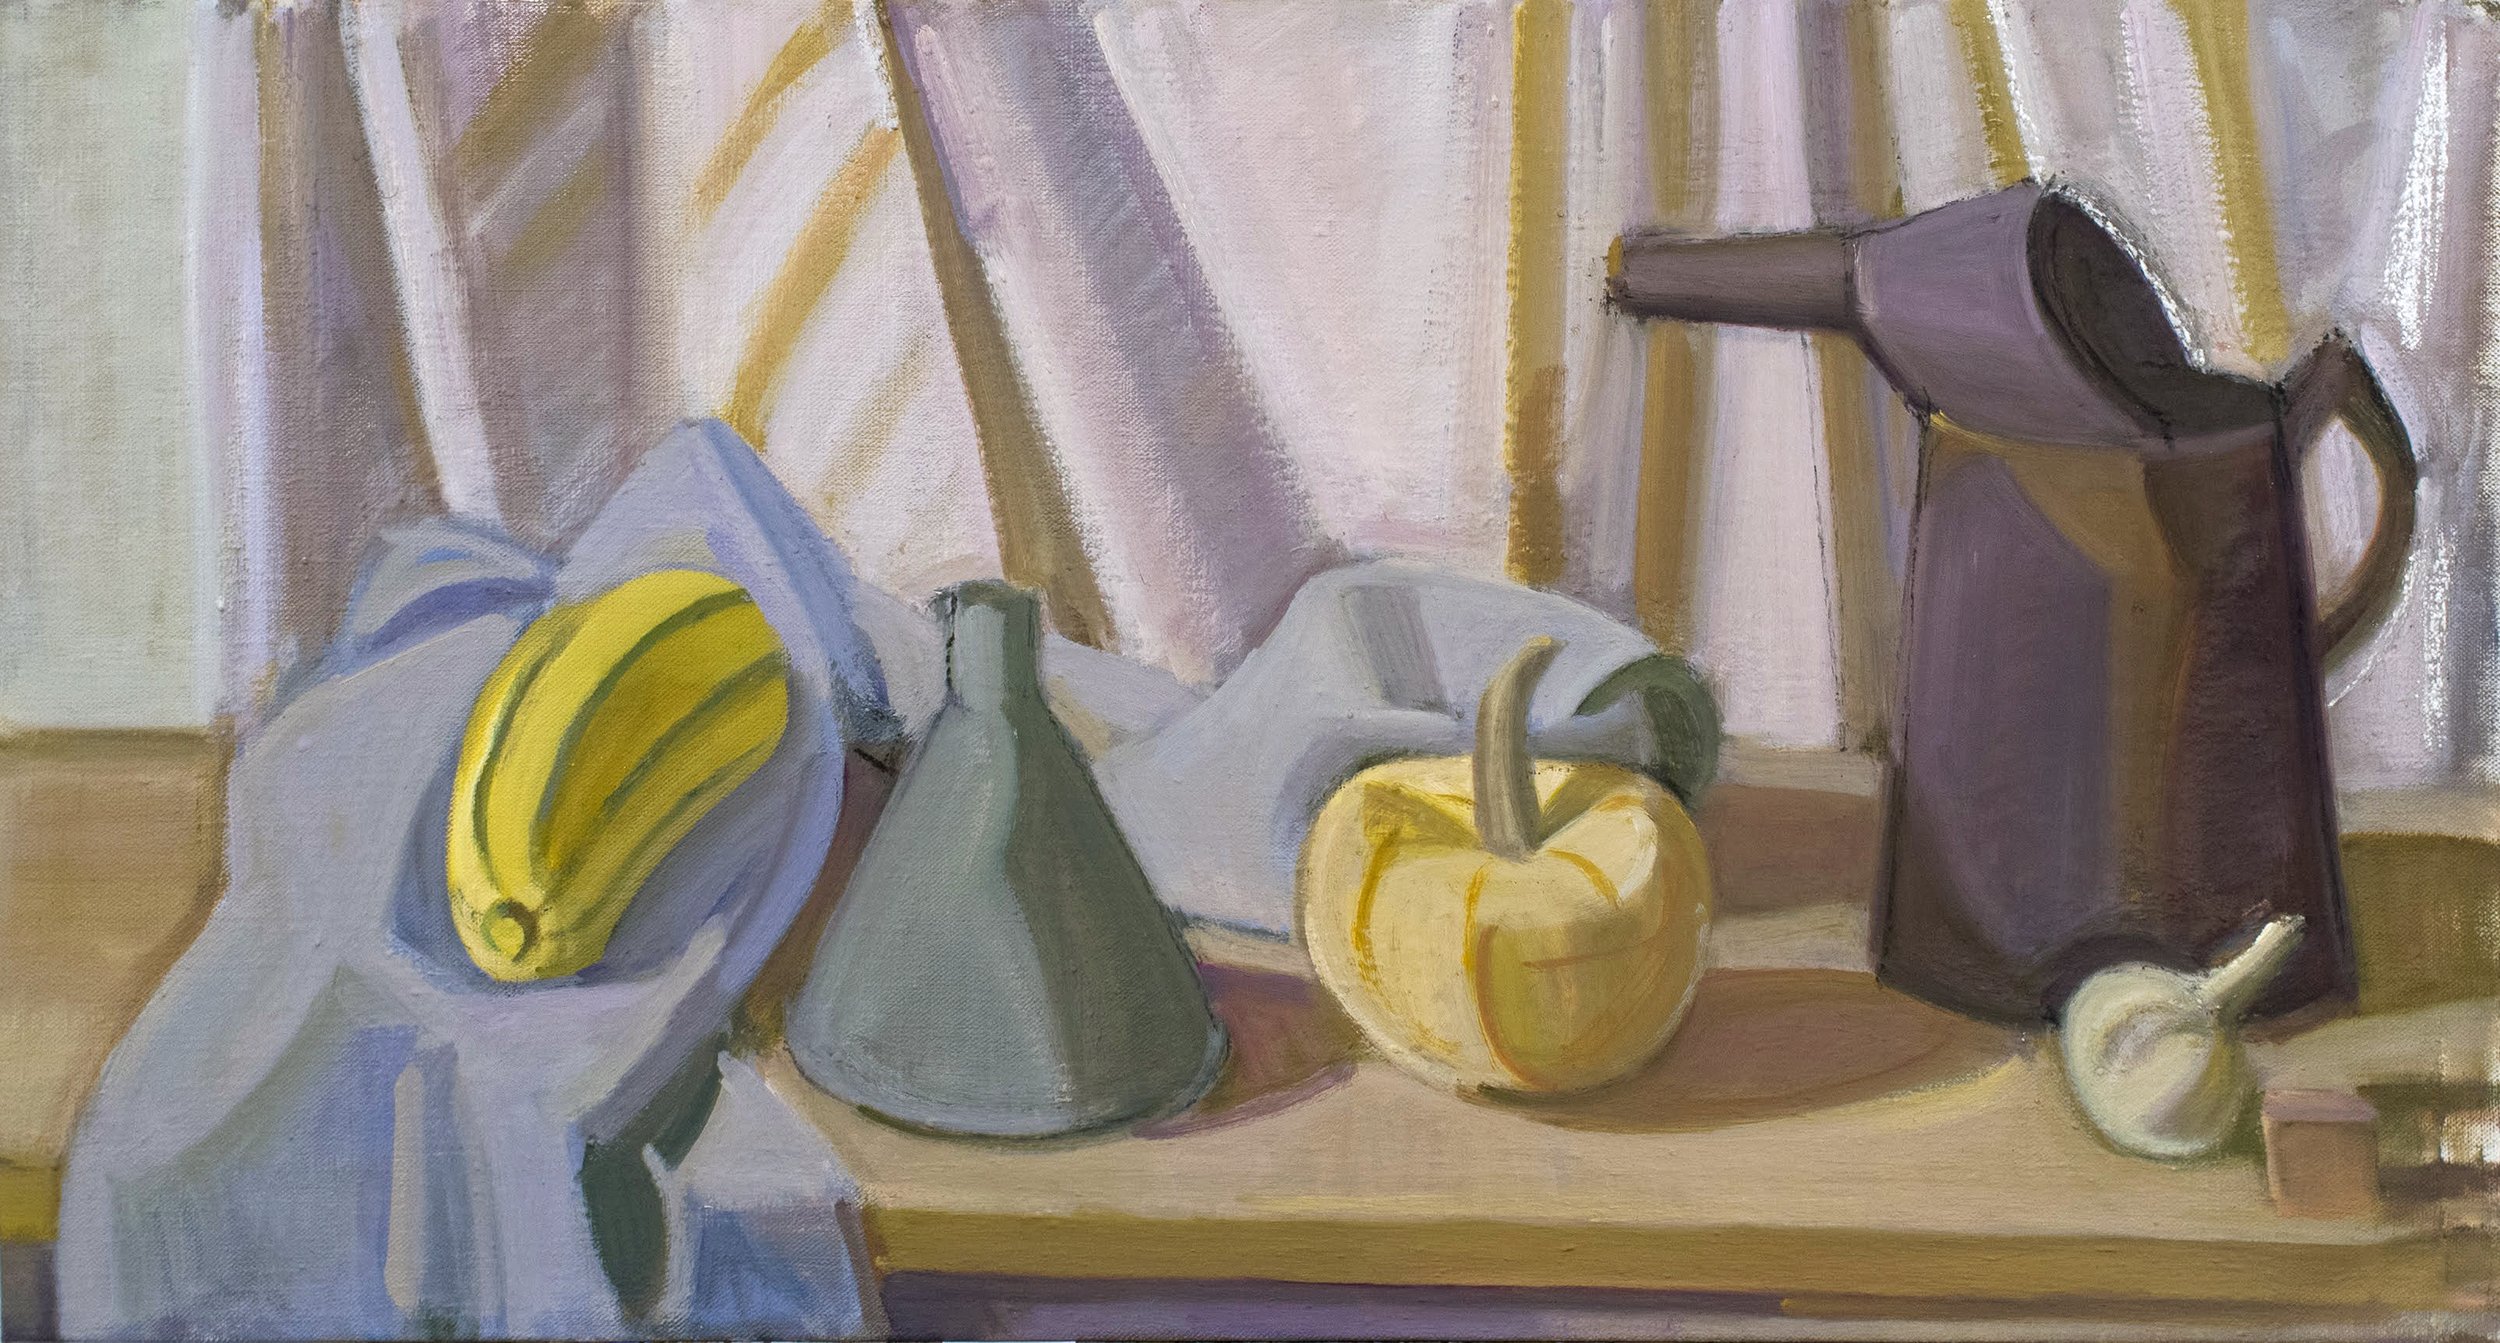   Oil Can with Funnel, Squash and Garlic , 2018-19, oil/canvas, 15 x 28 in (Not for sale) 